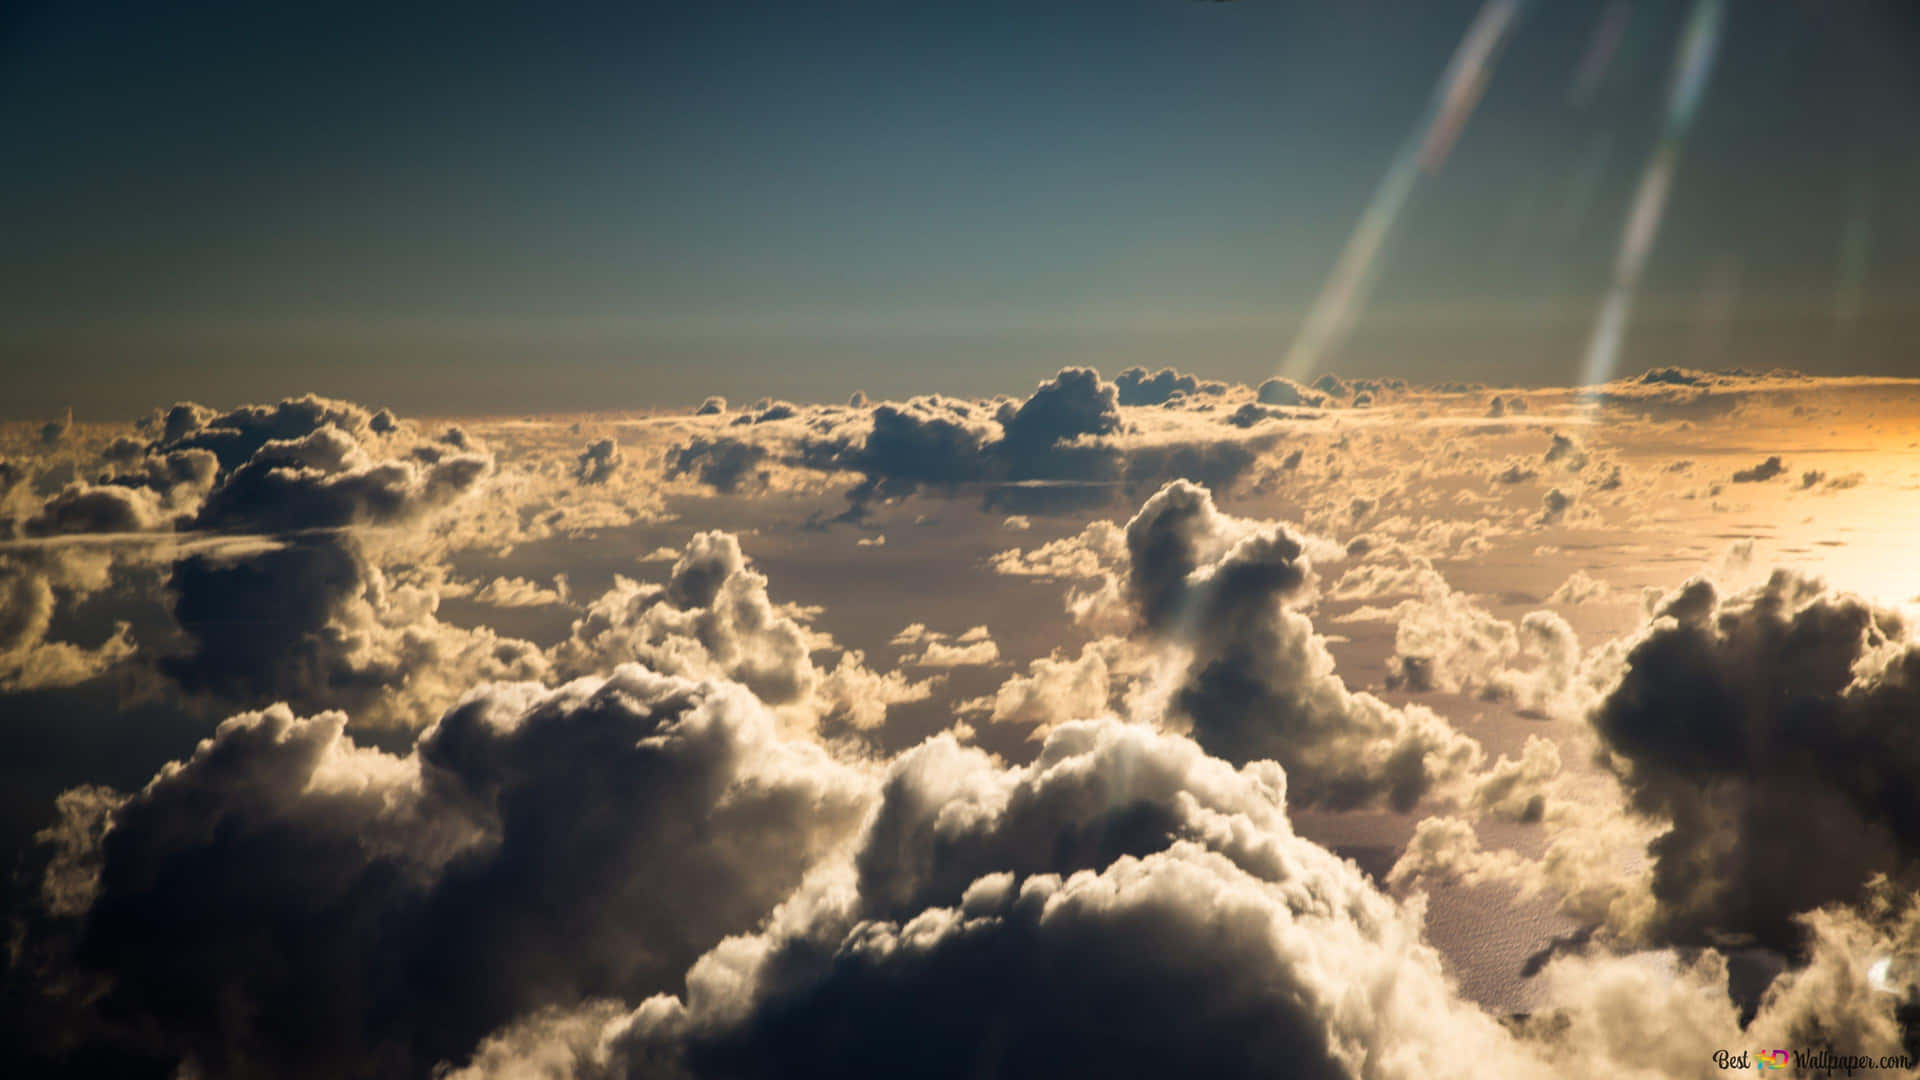 Experience the height of relaxation in the clouds - Cloud 9 Wallpaper